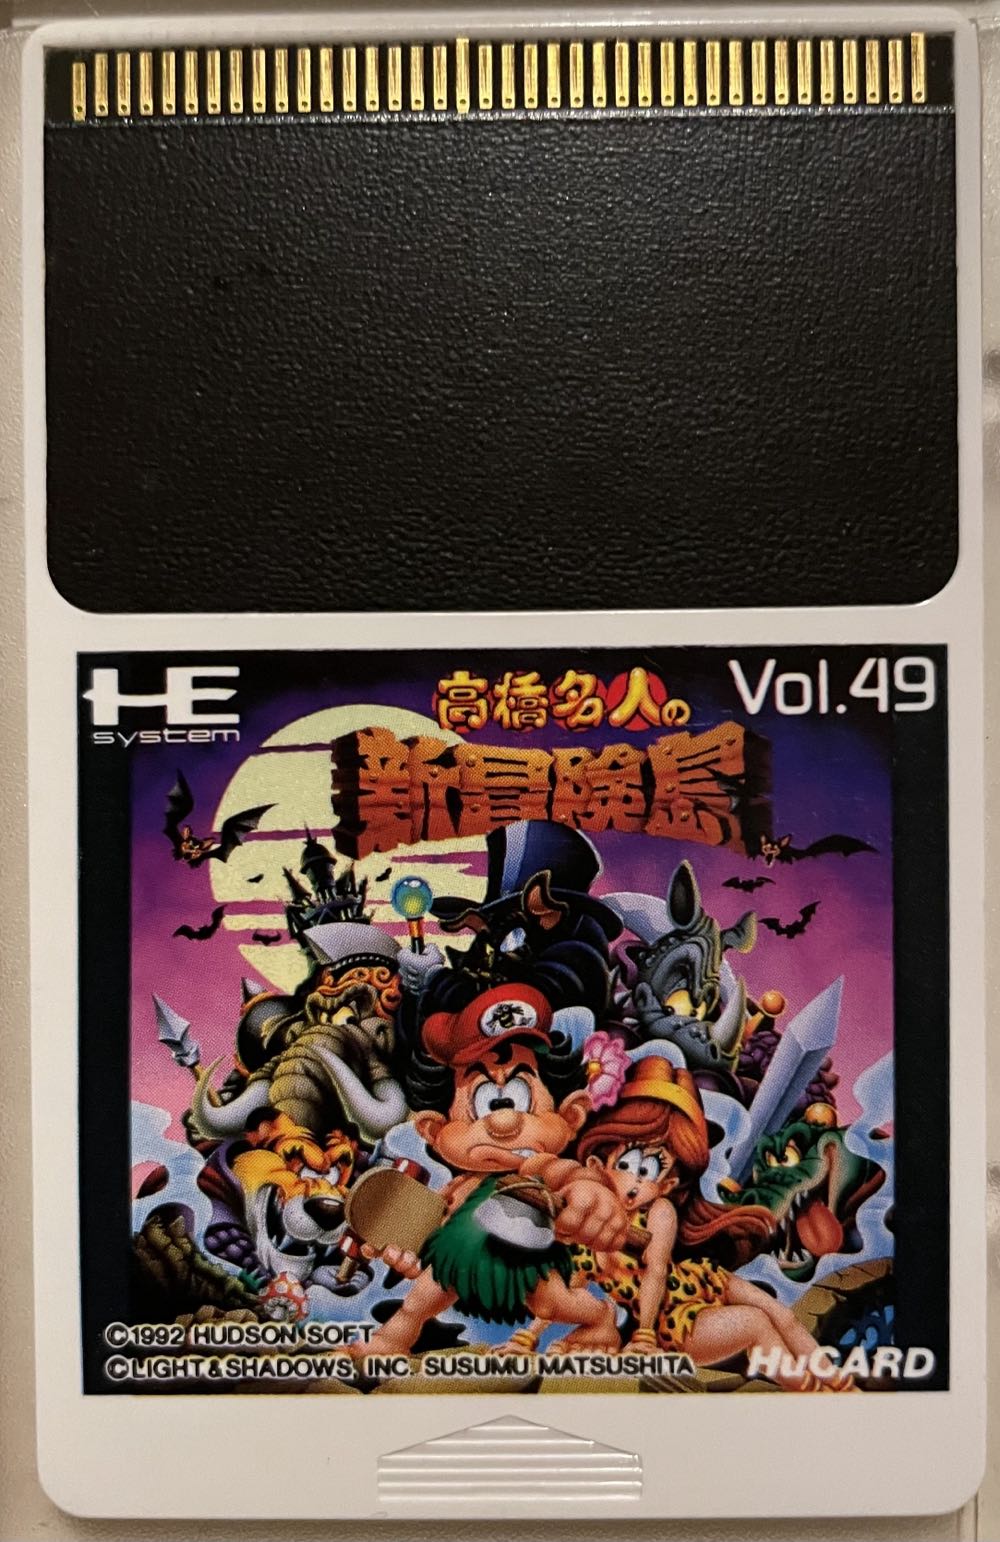 New Adventure Island - PC Engine (PC Engine Hucard) video game collectible - Main Image 3